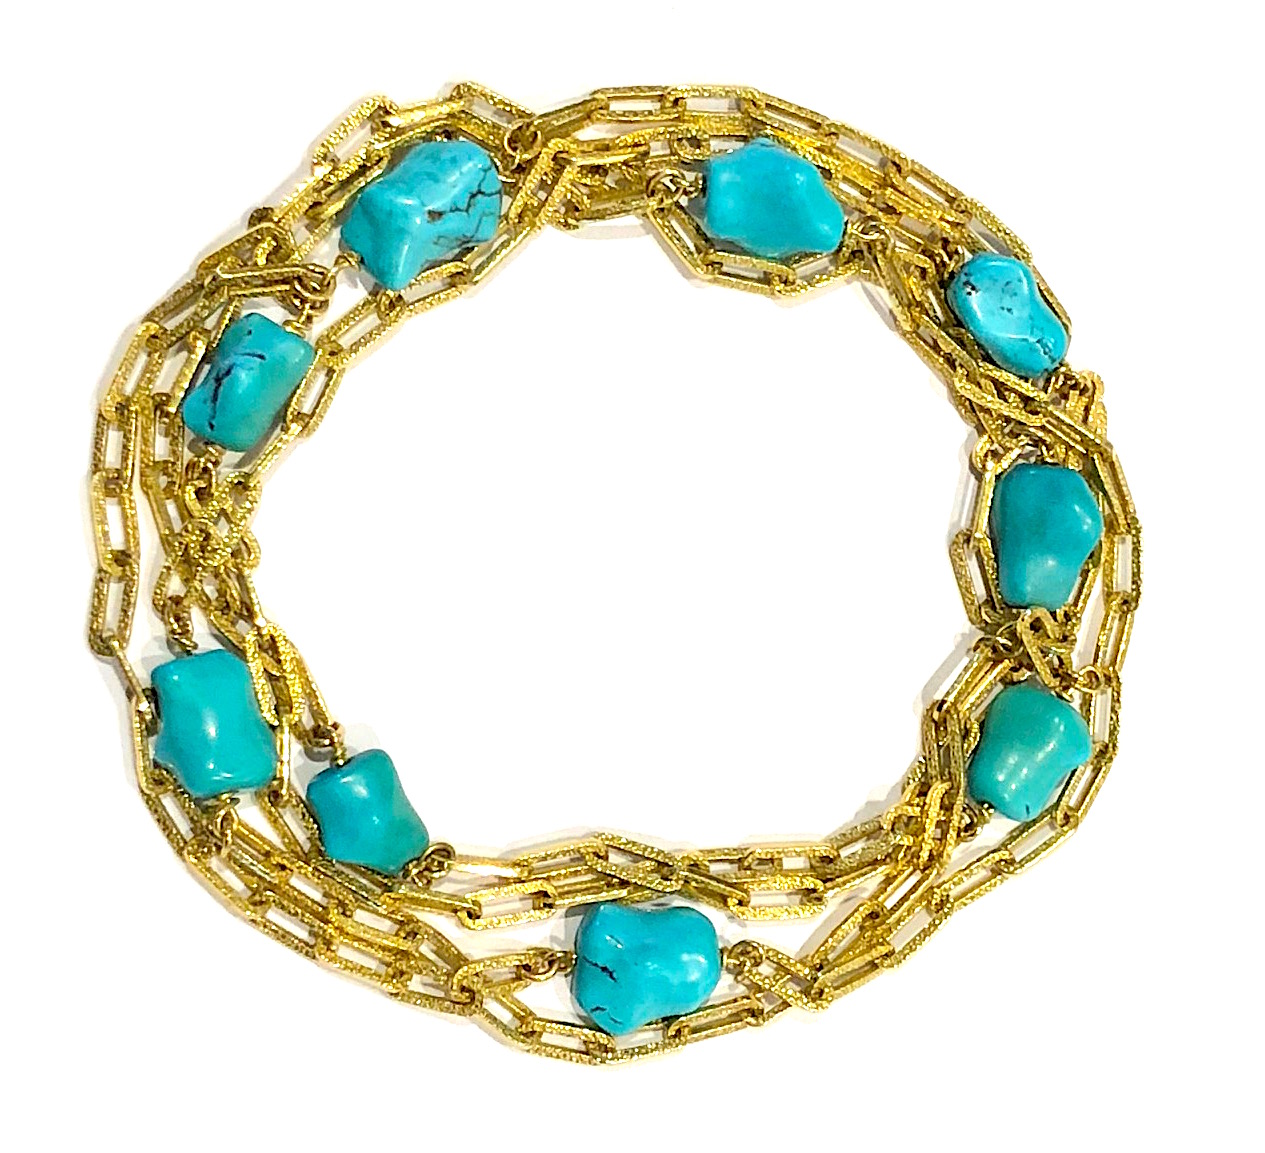 Italian long chain with 18k gold hammered links and set with 9 count gem quality naturally tumbled turquoise beads, marked: 20 (maker’s assigned number, VR for Verona, 750 for 18k gold, c. 1970’s